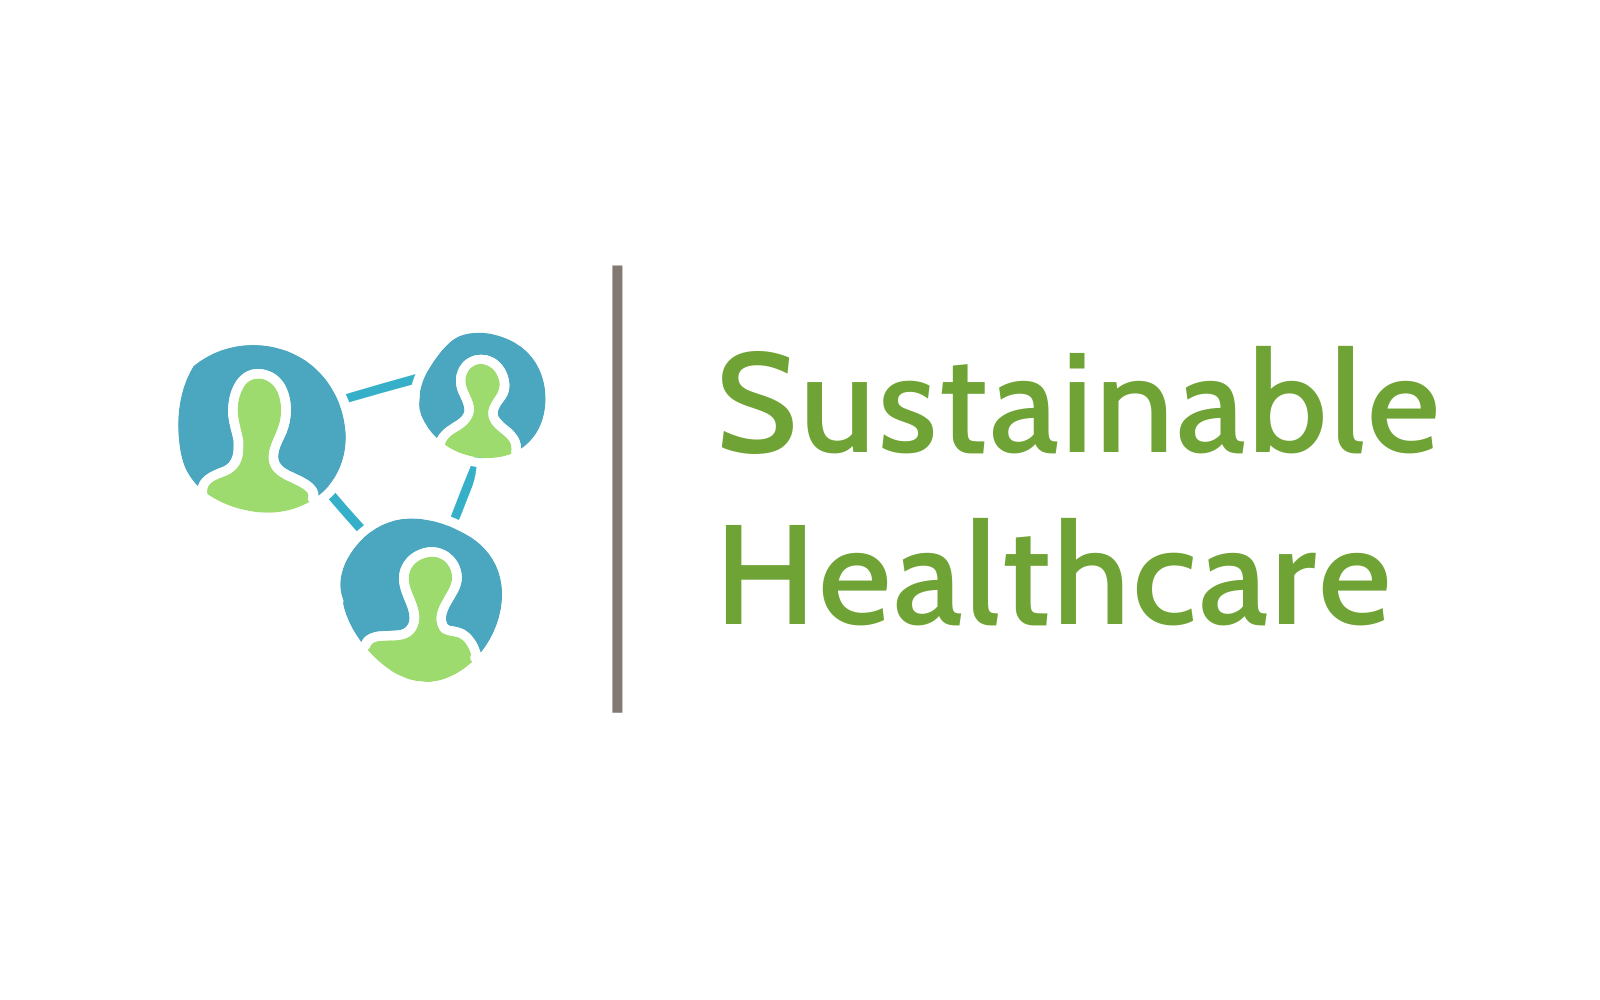 Sustainable healthcare